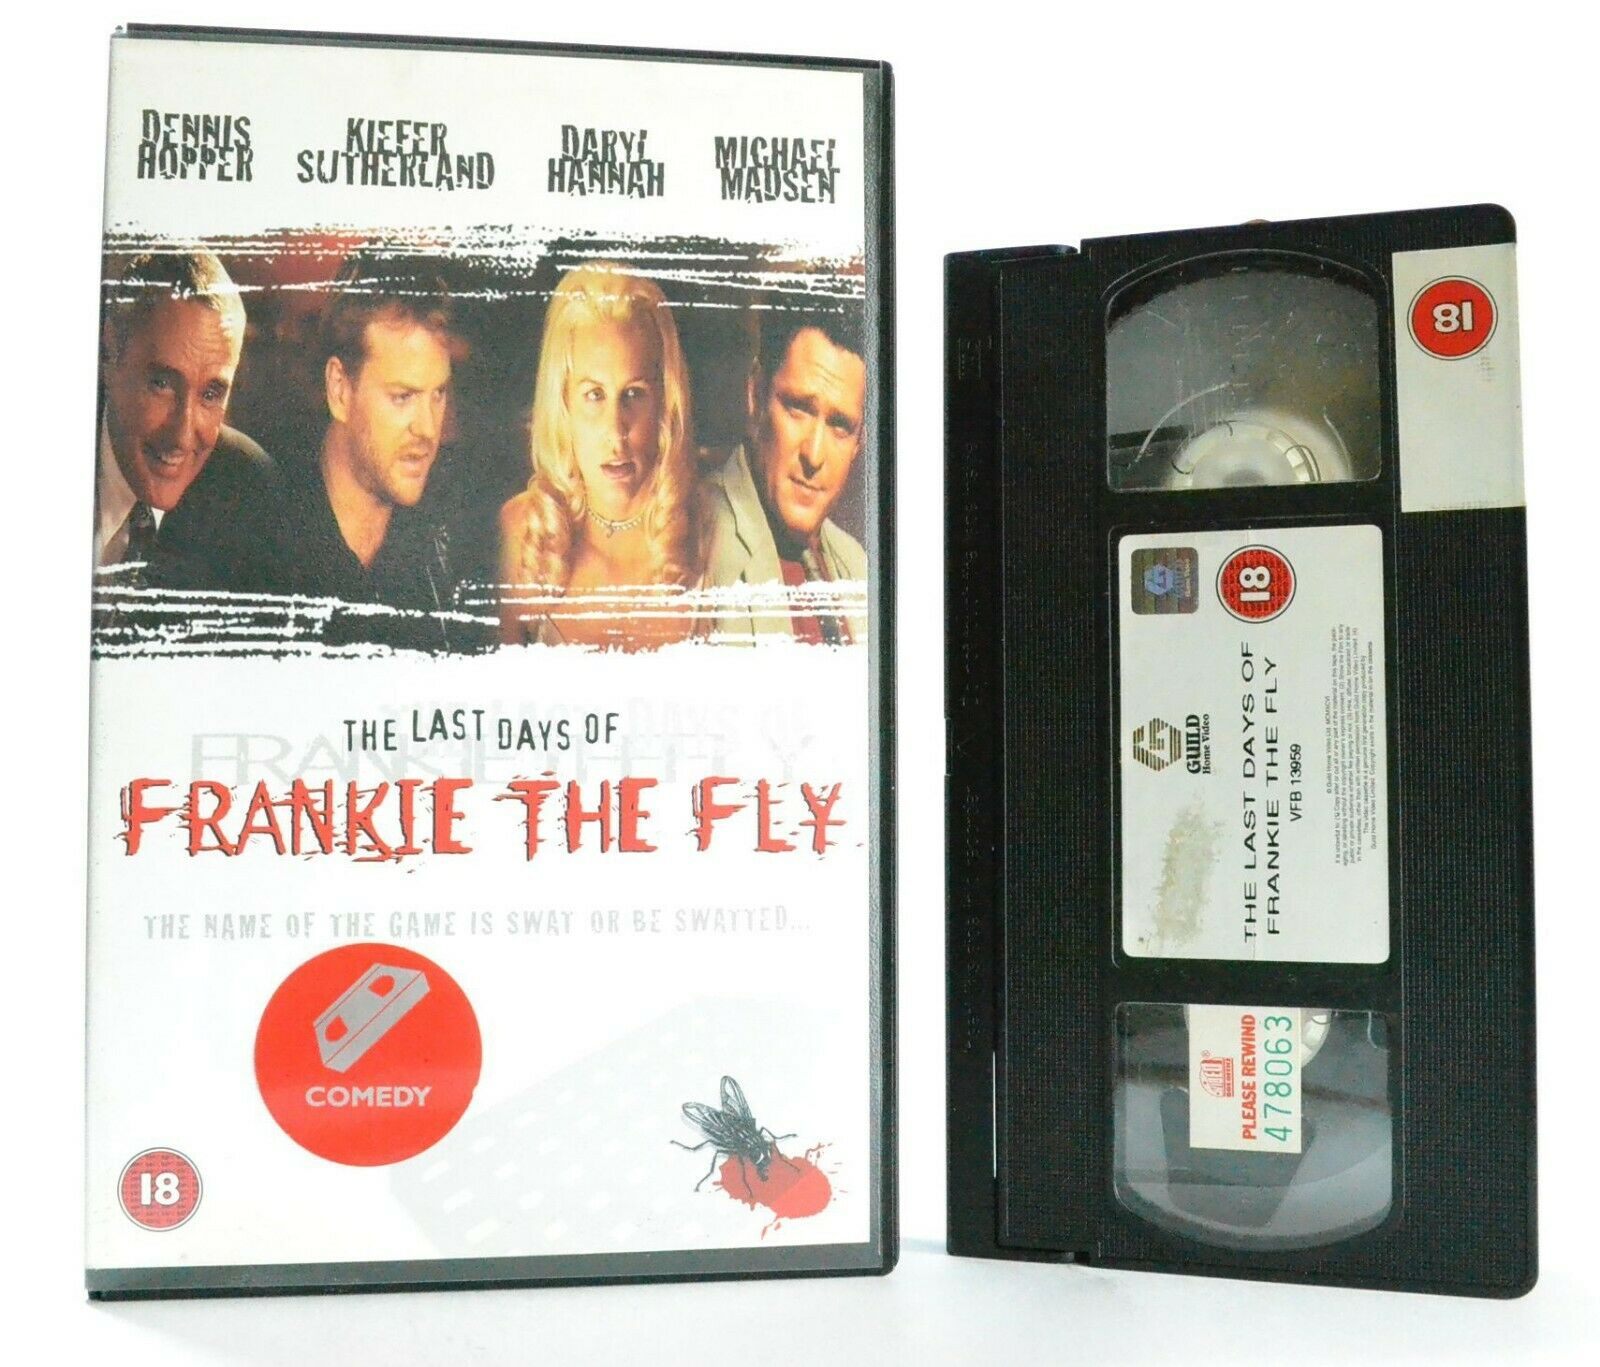 The Last Days Of Frankie The Fly: Comic Thriller - Large Box - D.Hopper - VHS-